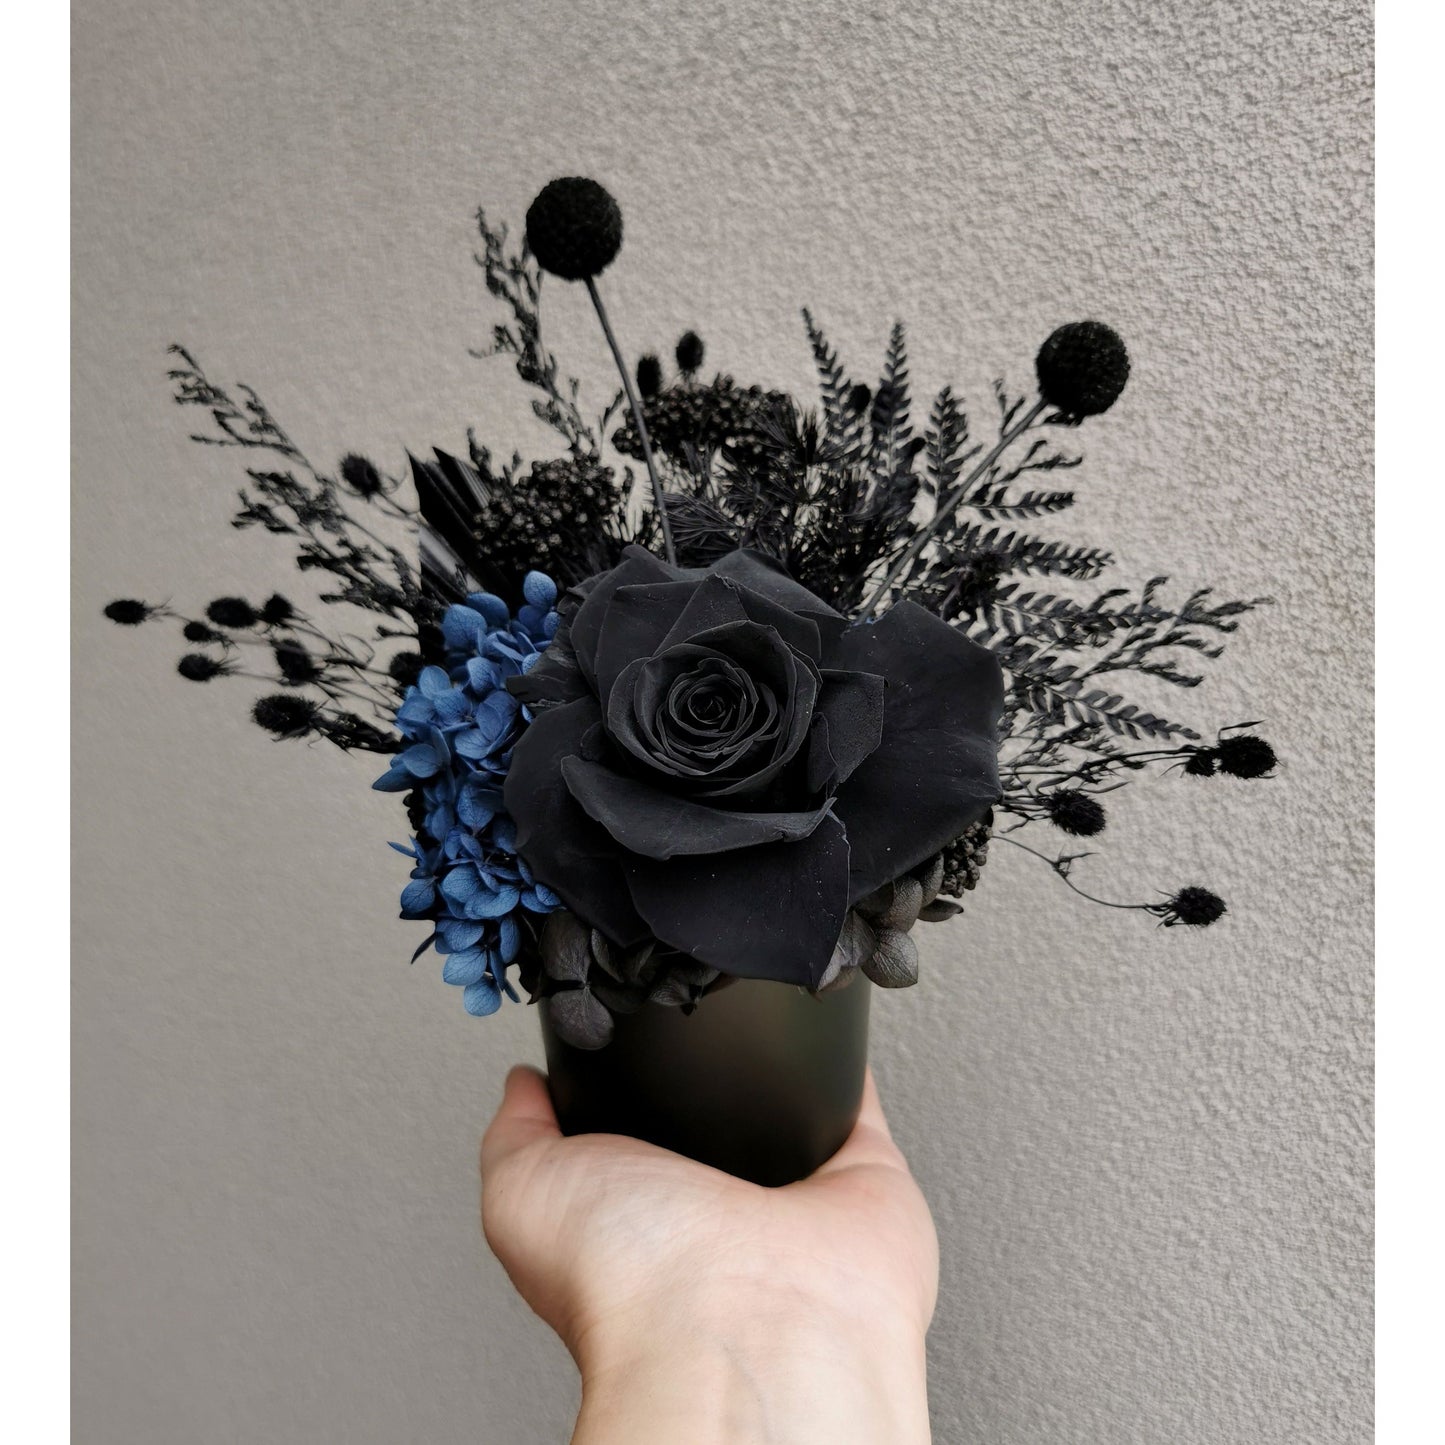 Black & Navy Blue dried flower arrangement in black round pot. Picture shows arrangement held up by hand against a blank wall 